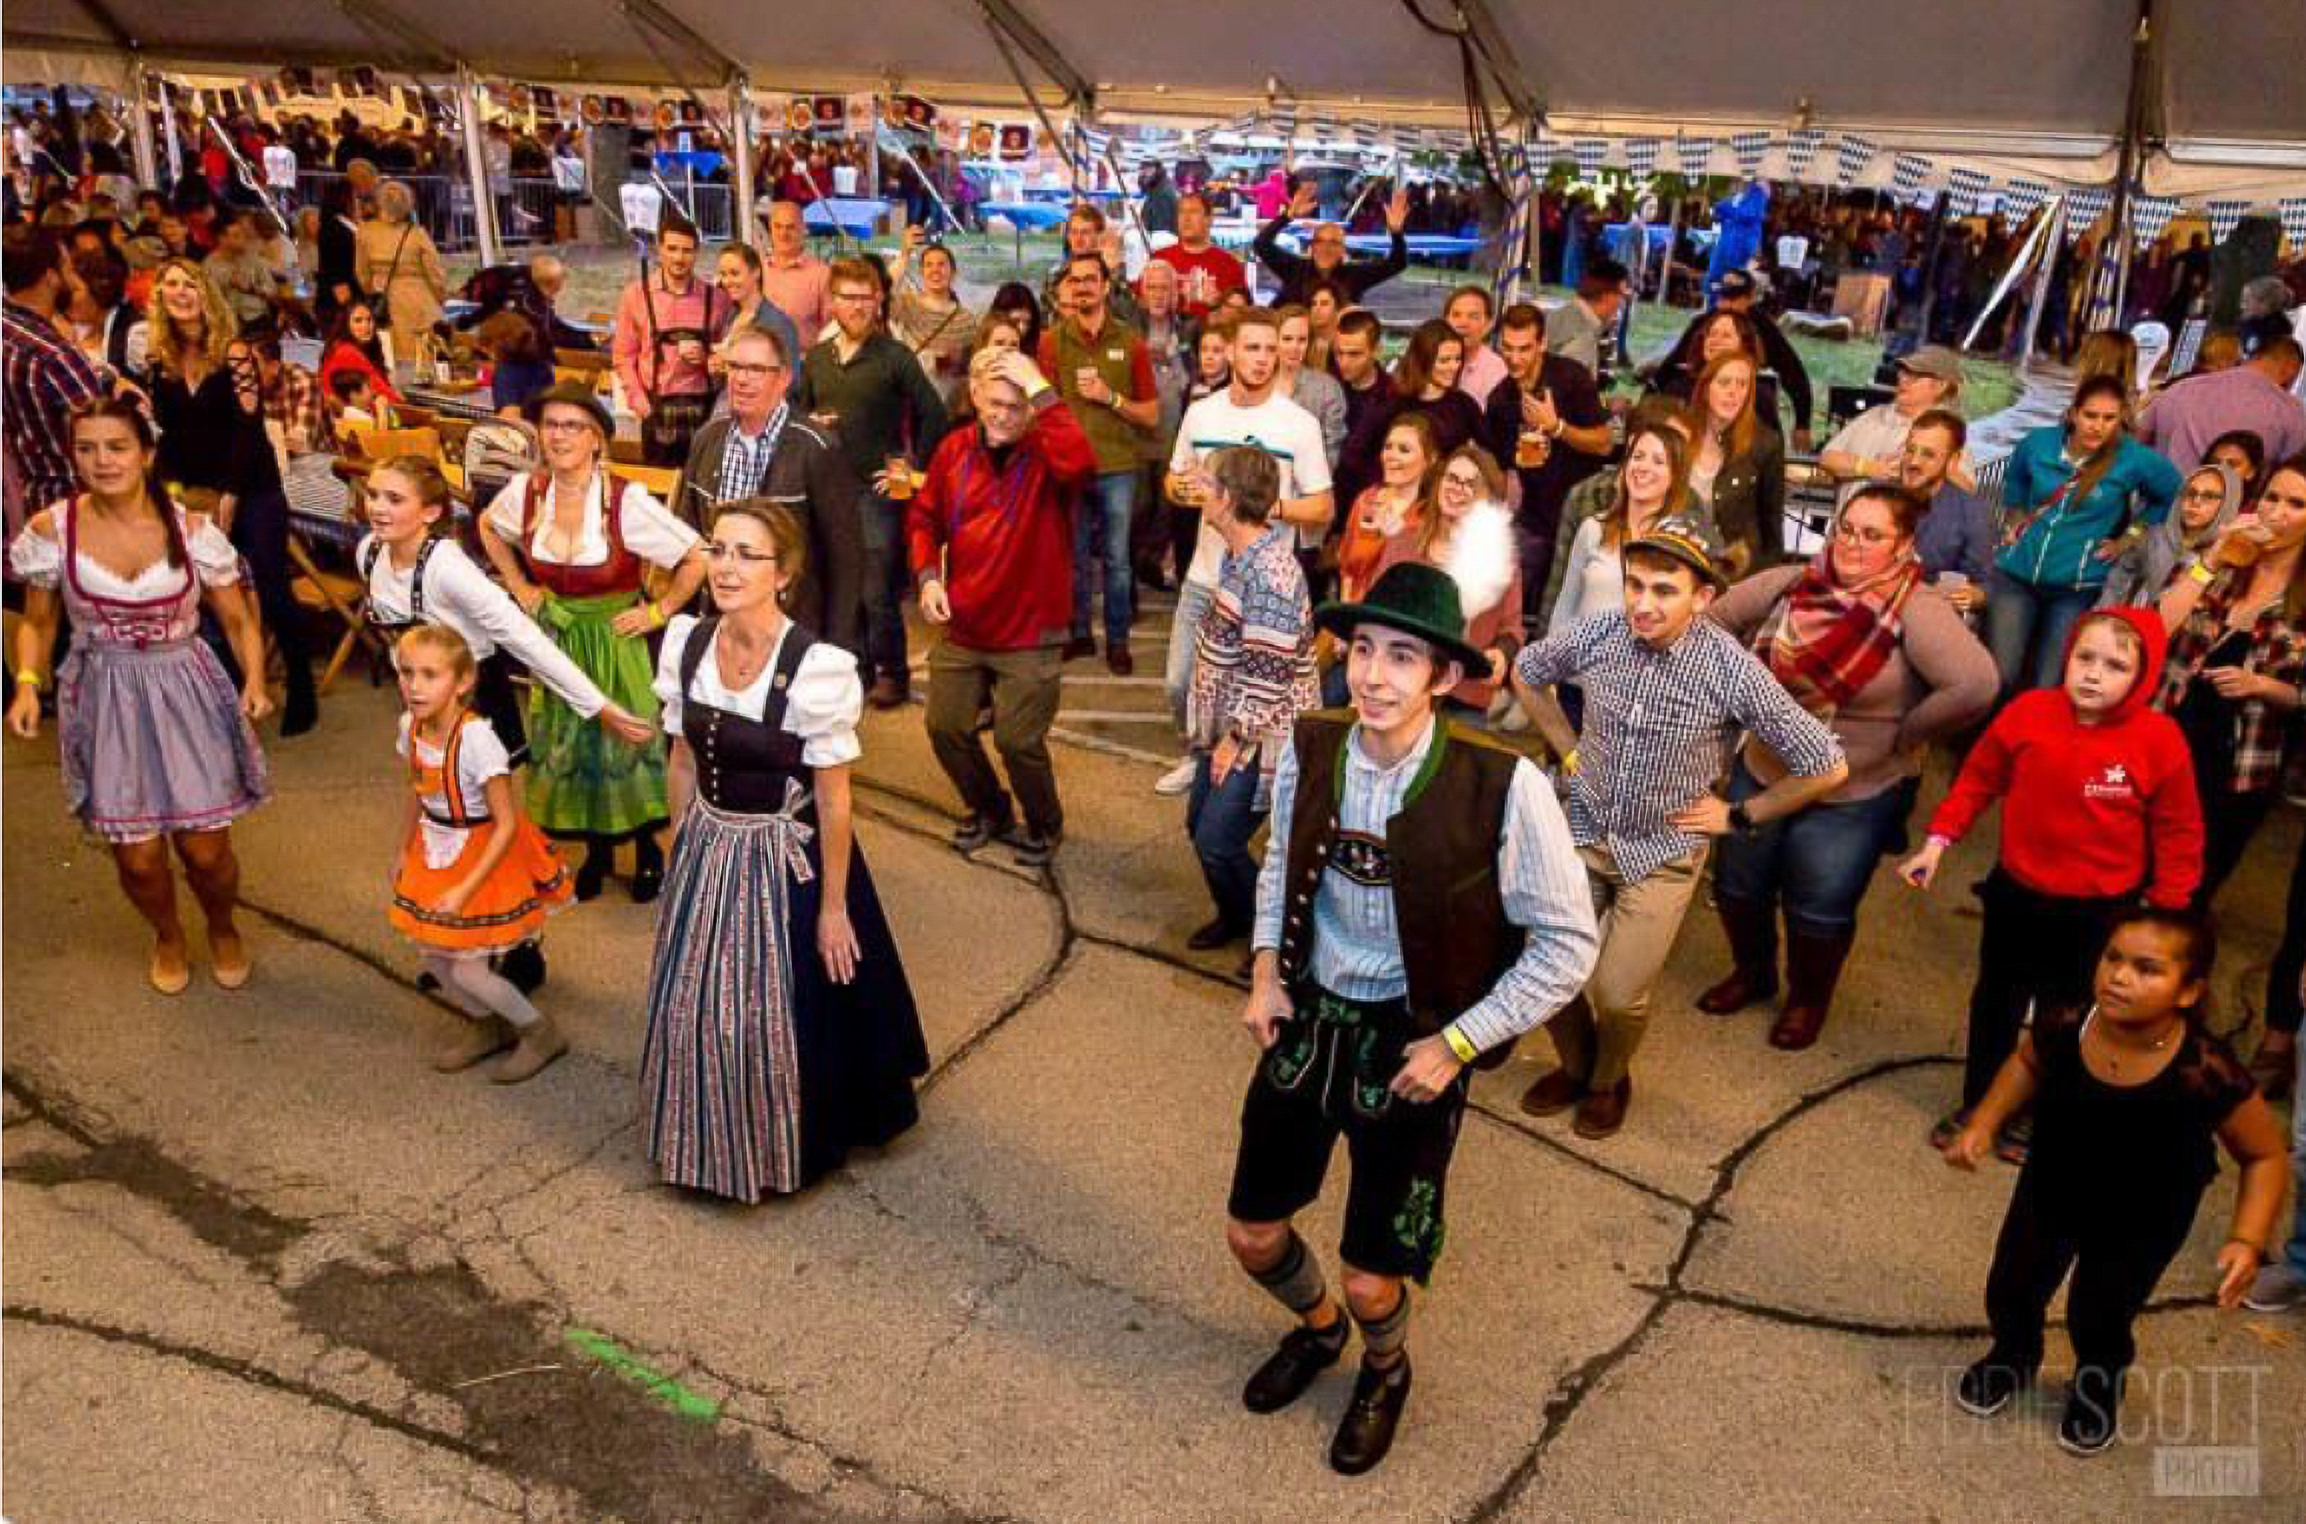 Oktoberfest is returning to Champaign